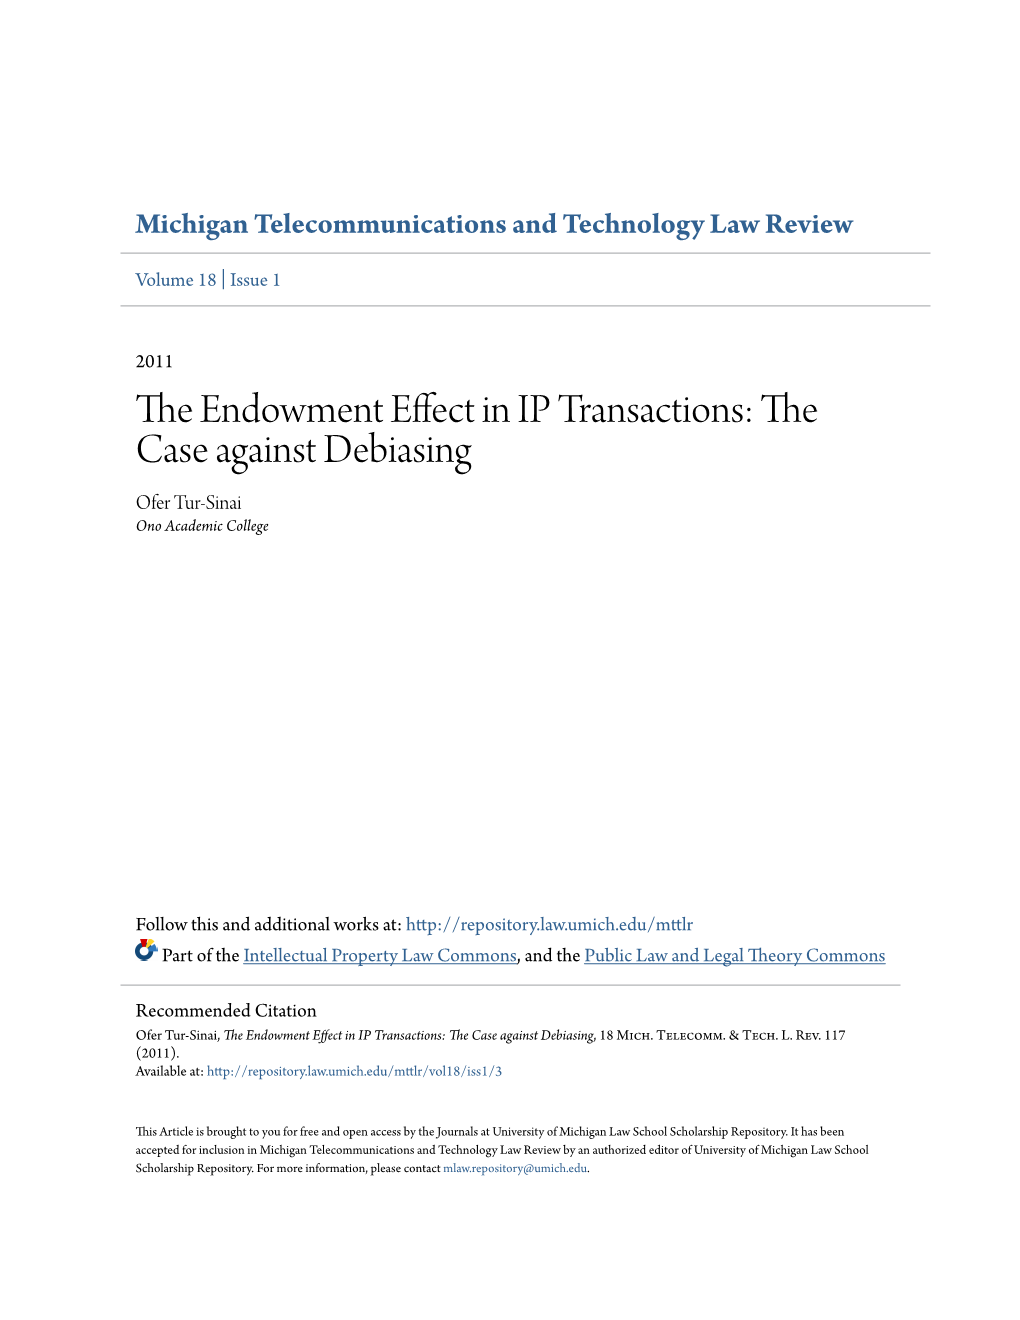 The Endowment Effect in IP Transactions: the Case Against Debiasing, 18 Mich